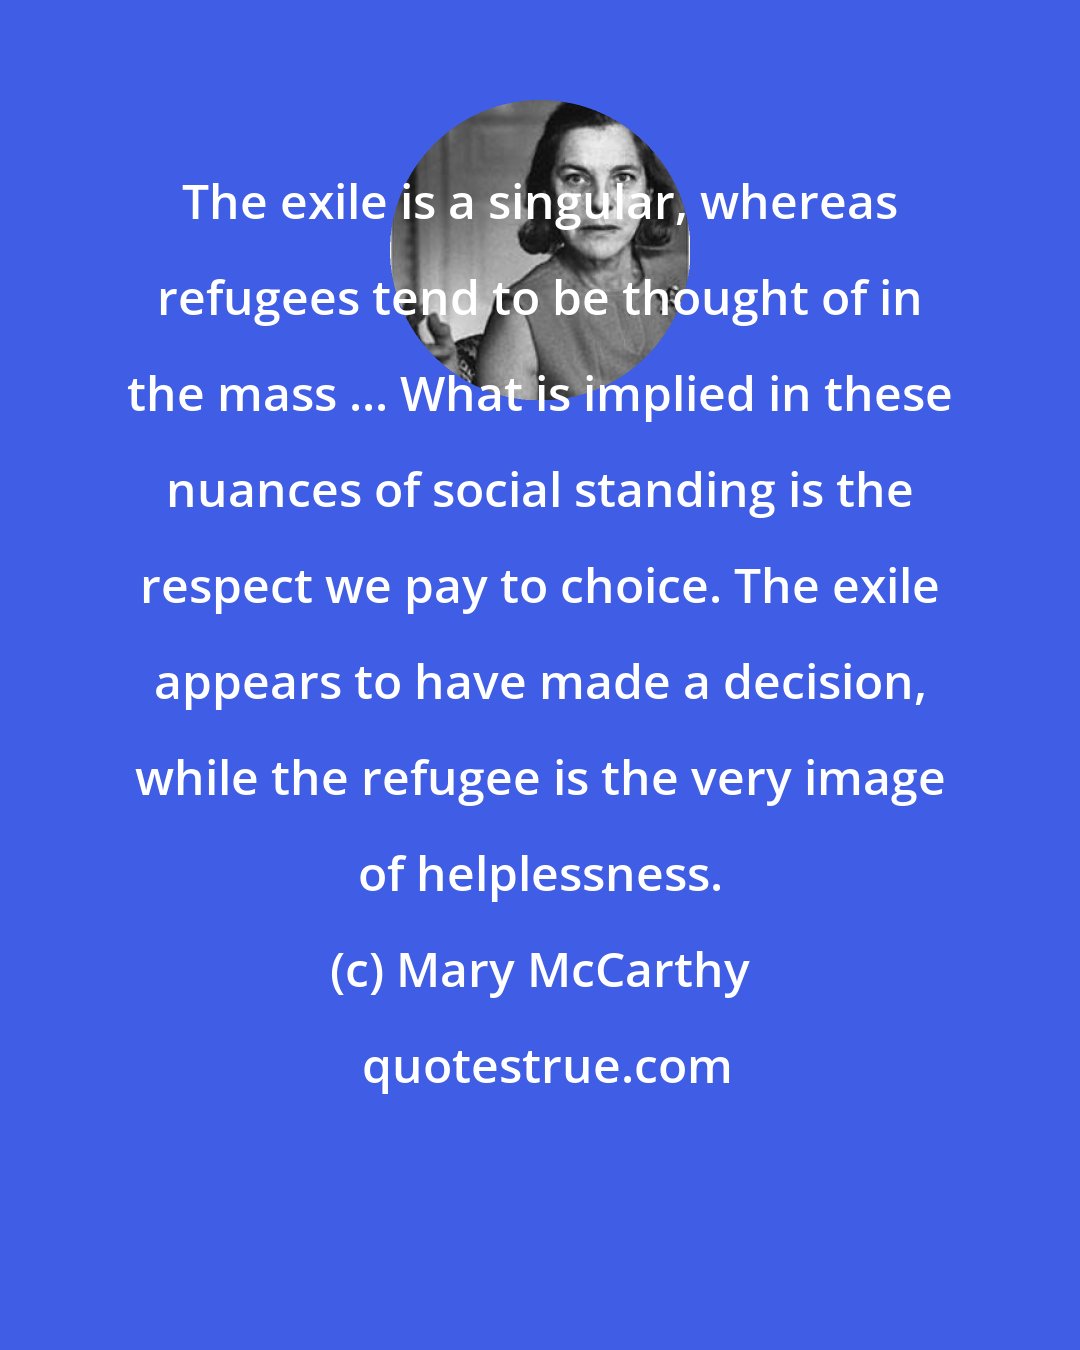 Mary McCarthy: The exile is a singular, whereas refugees tend to be thought of in the mass ... What is implied in these nuances of social standing is the respect we pay to choice. The exile appears to have made a decision, while the refugee is the very image of helplessness.